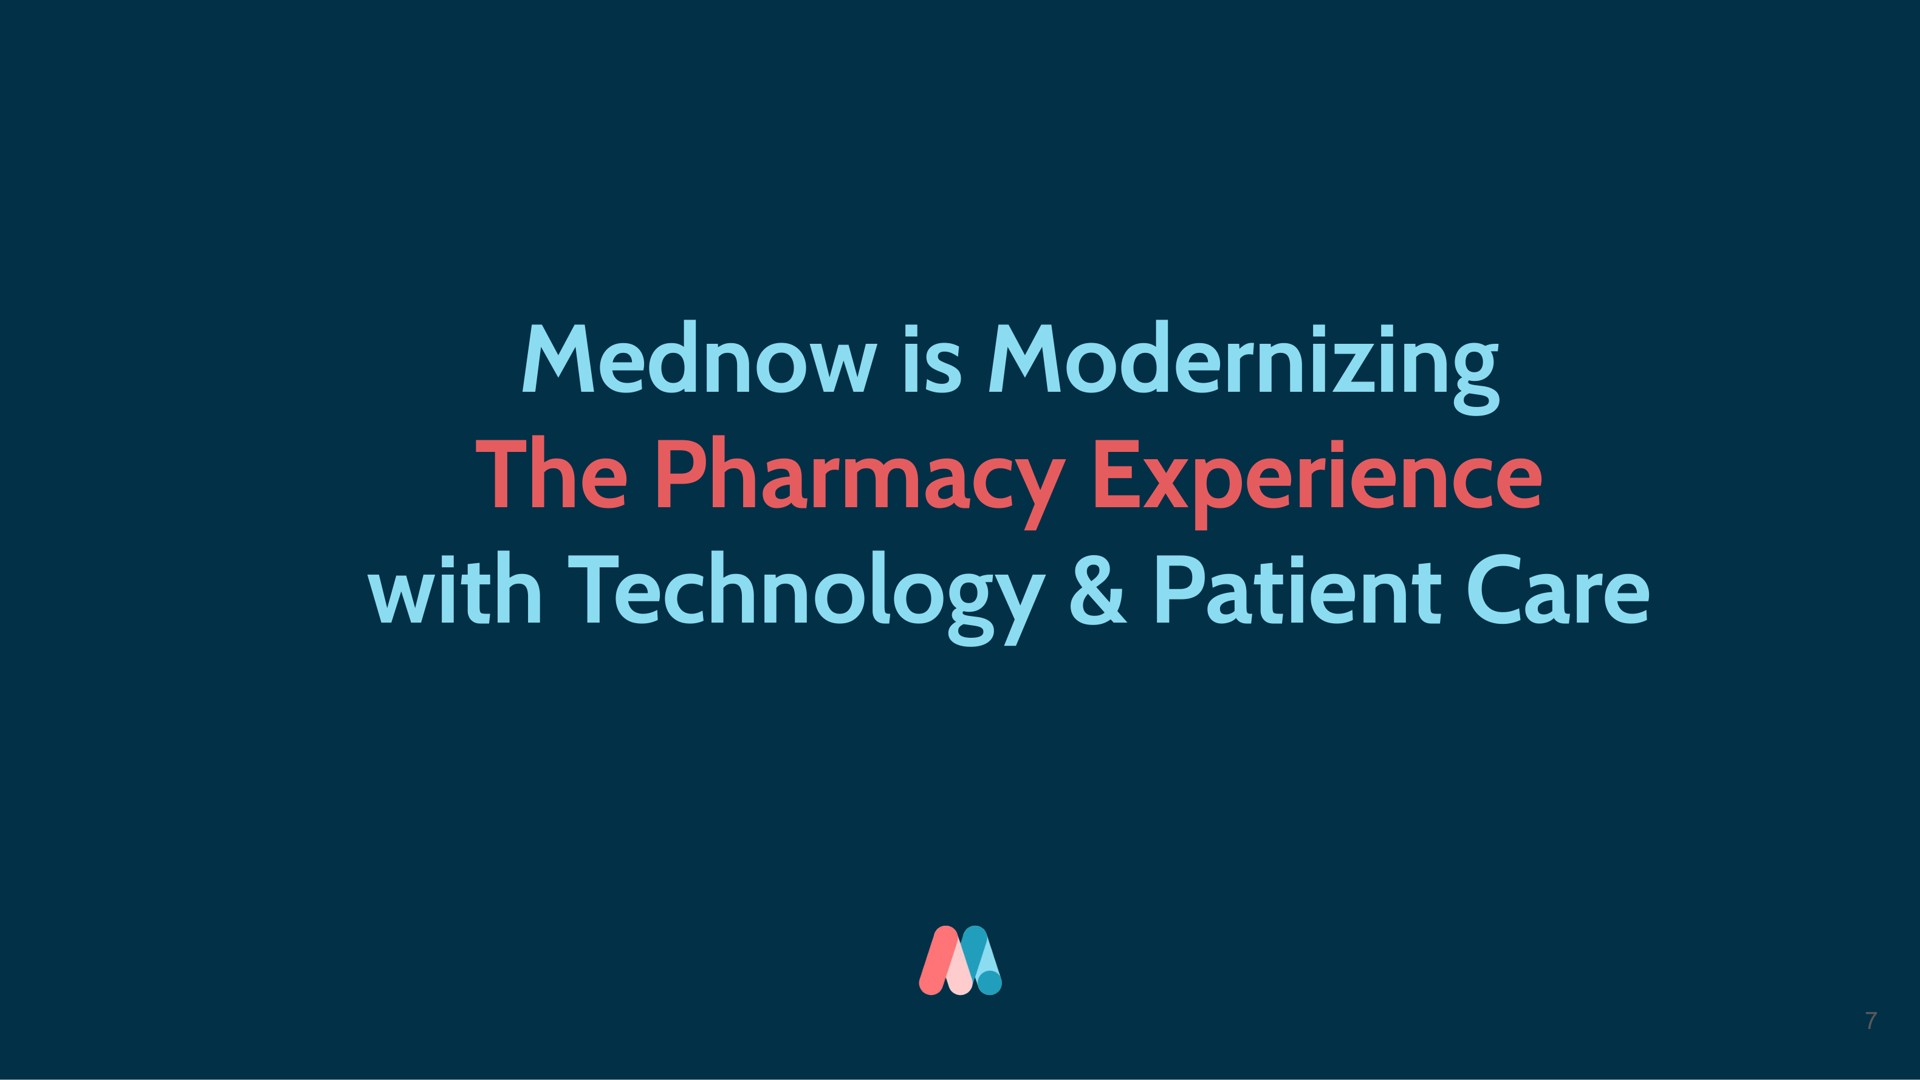 is modernizing the pharmacy experience with technology patient care | Mednow